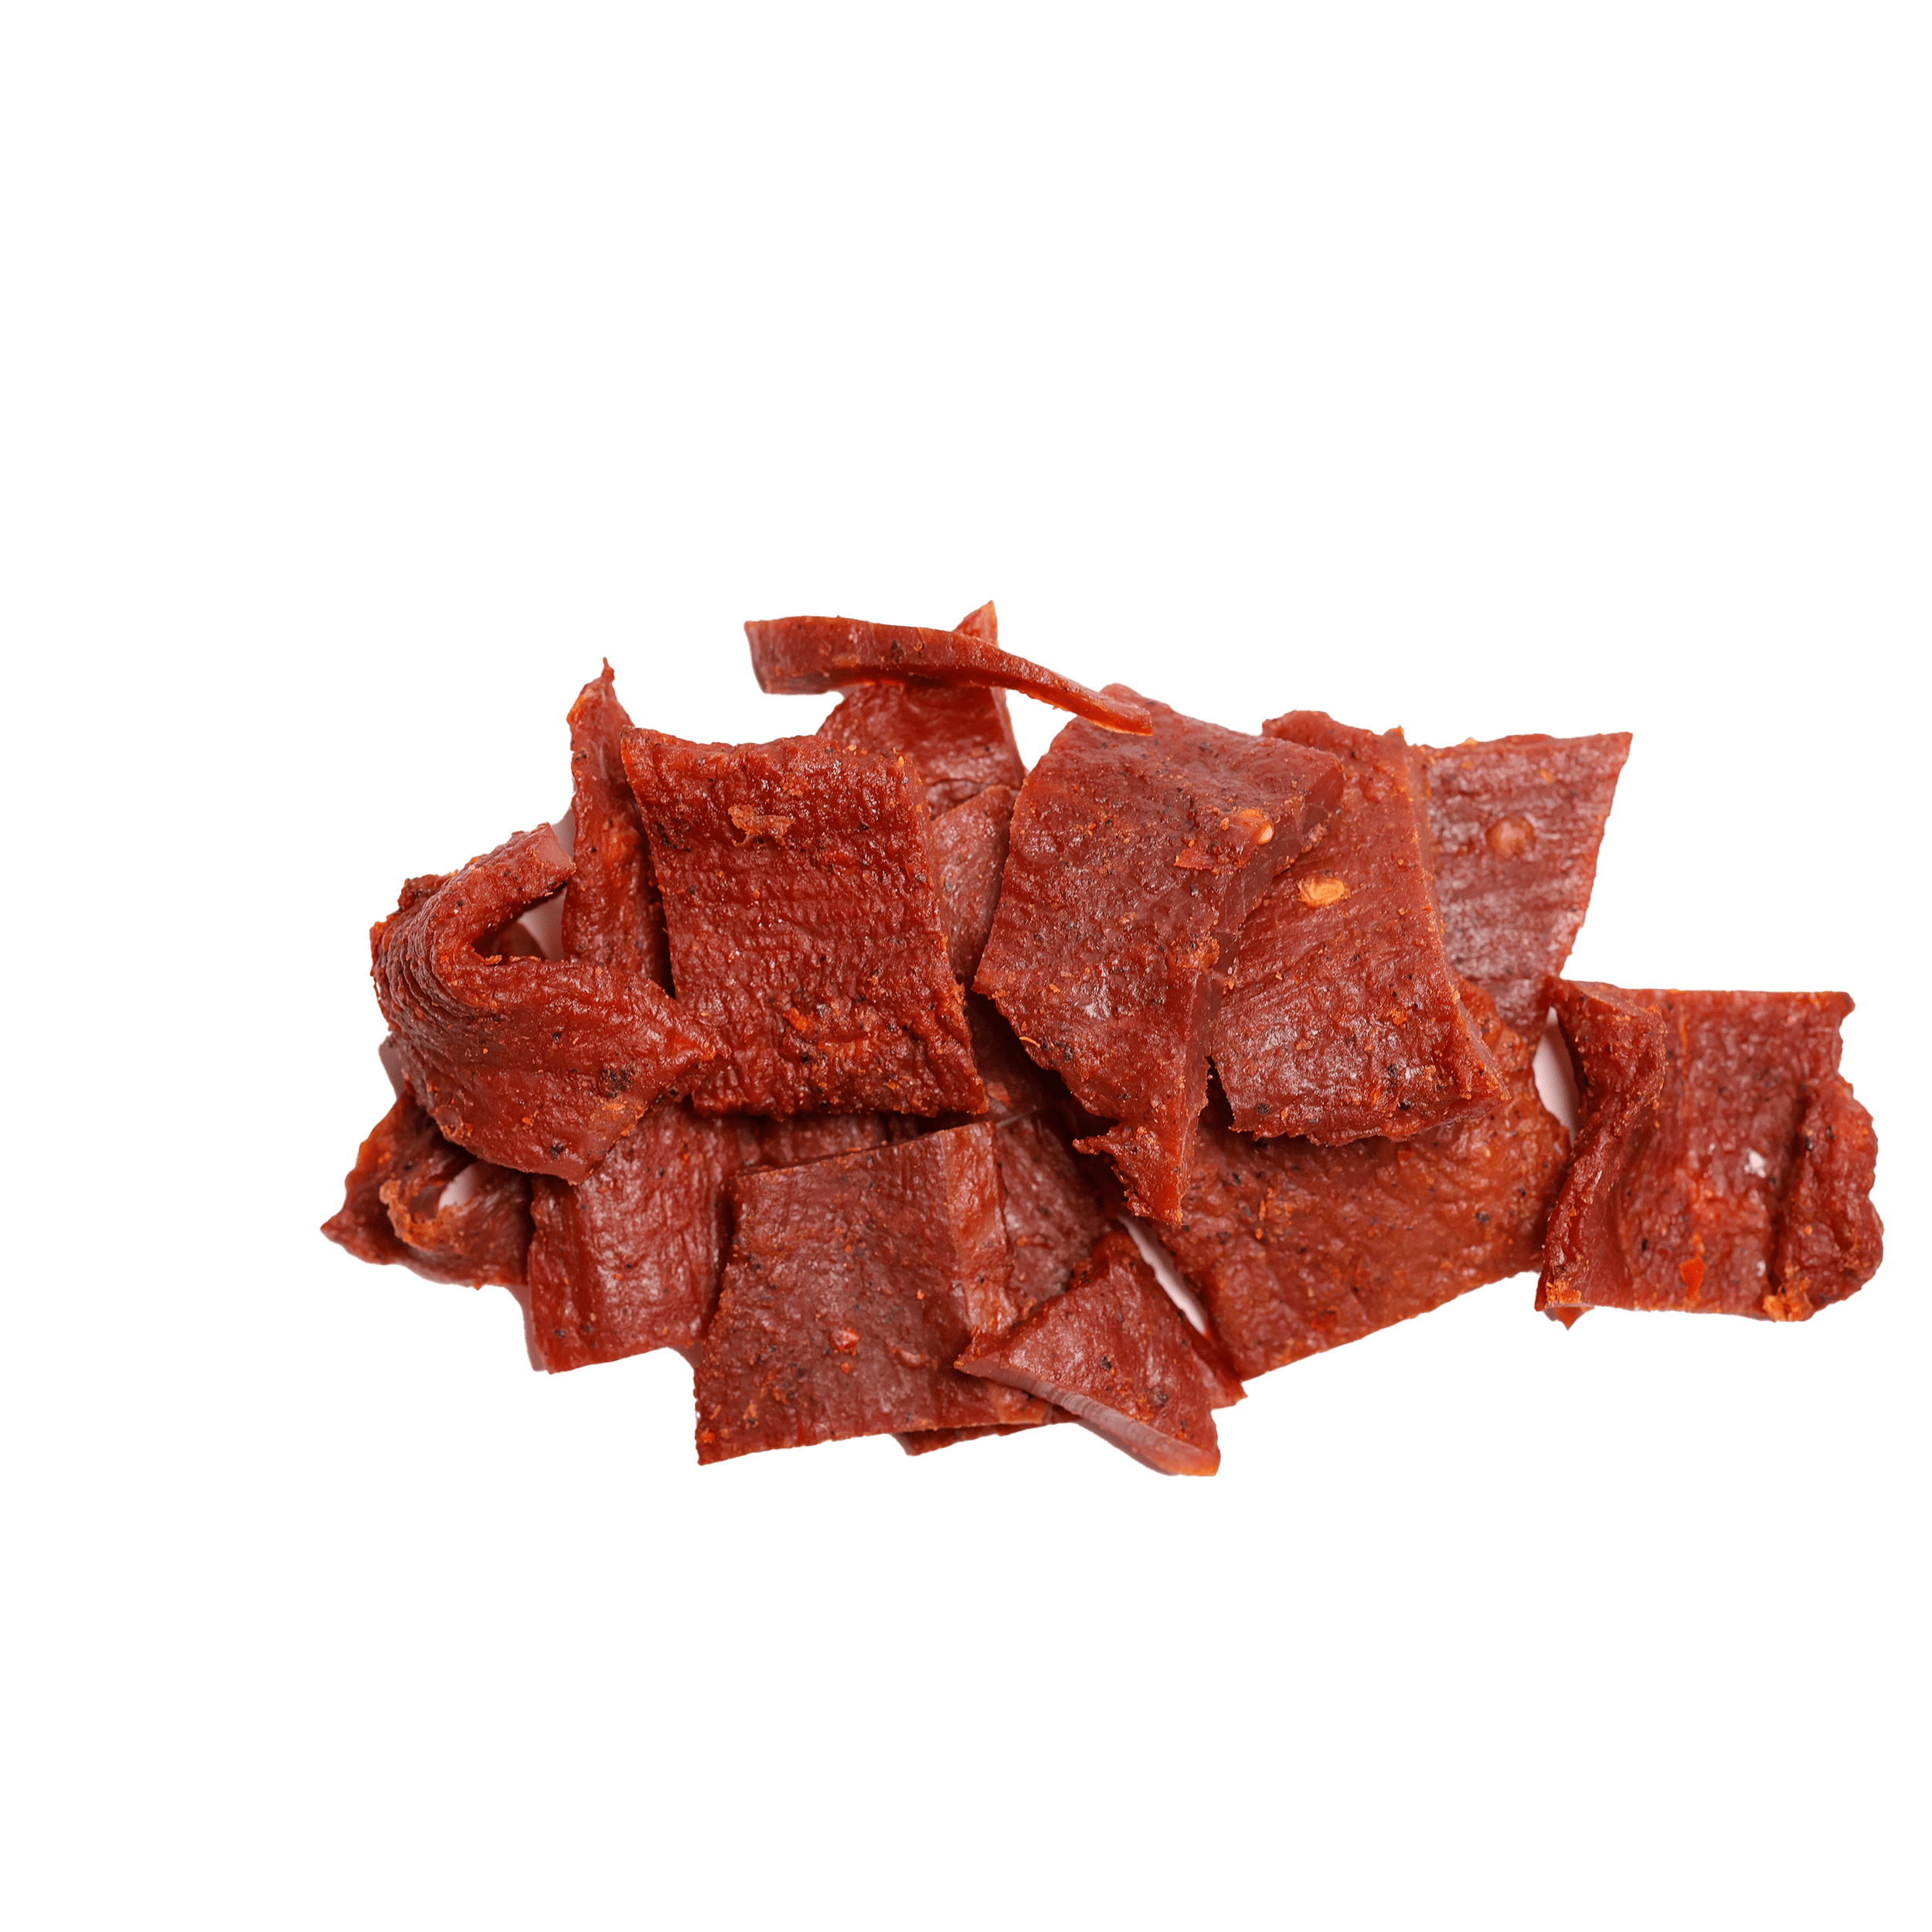 Load image into Gallery viewer, Original Beef Jerky 3 oz.
